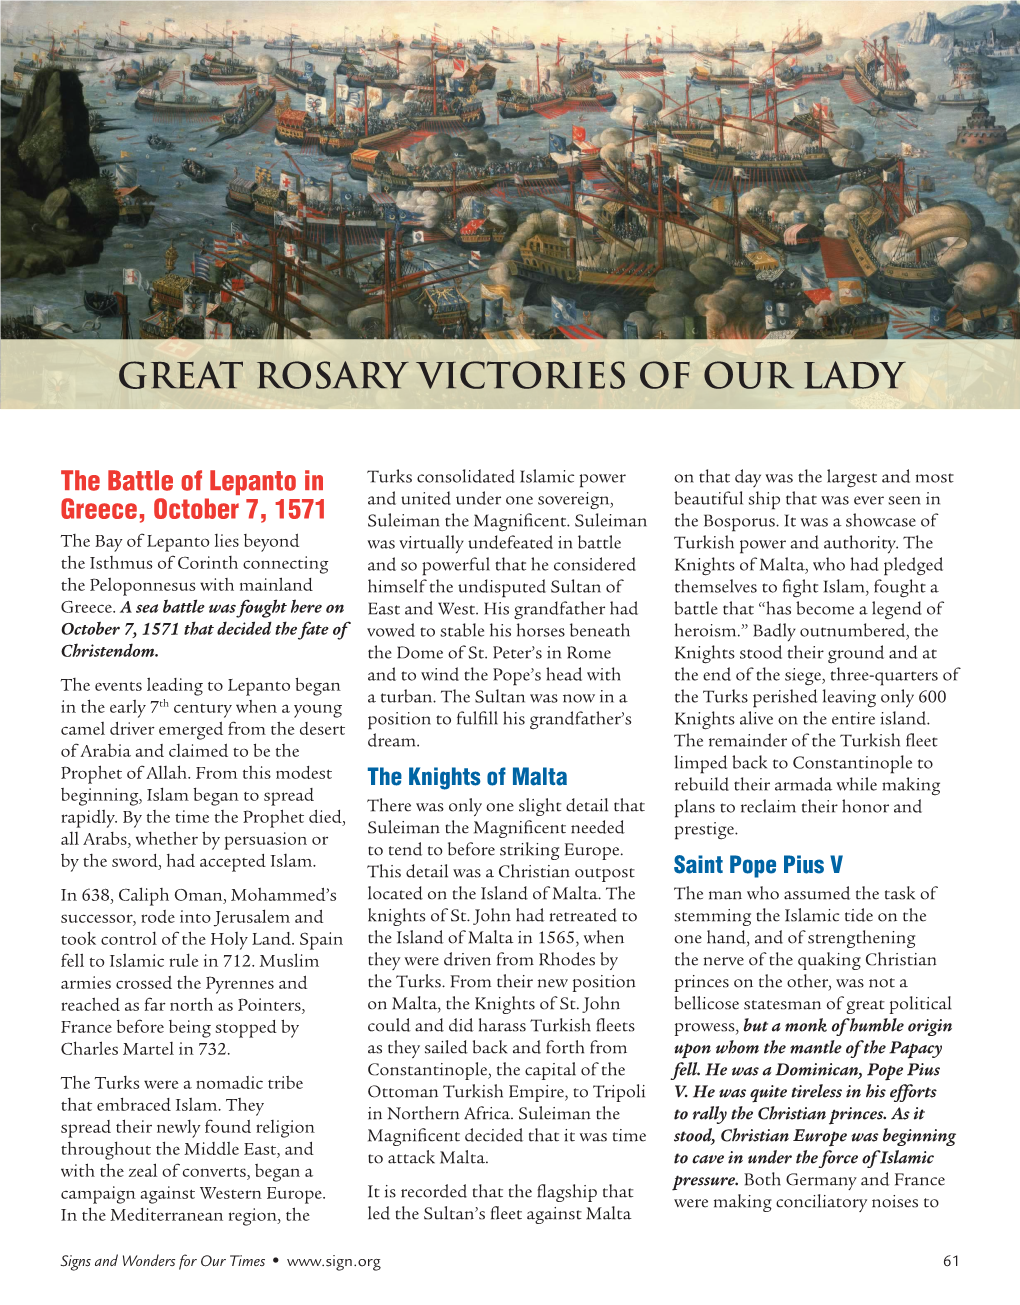 Great Rosary Victories of Our Lady